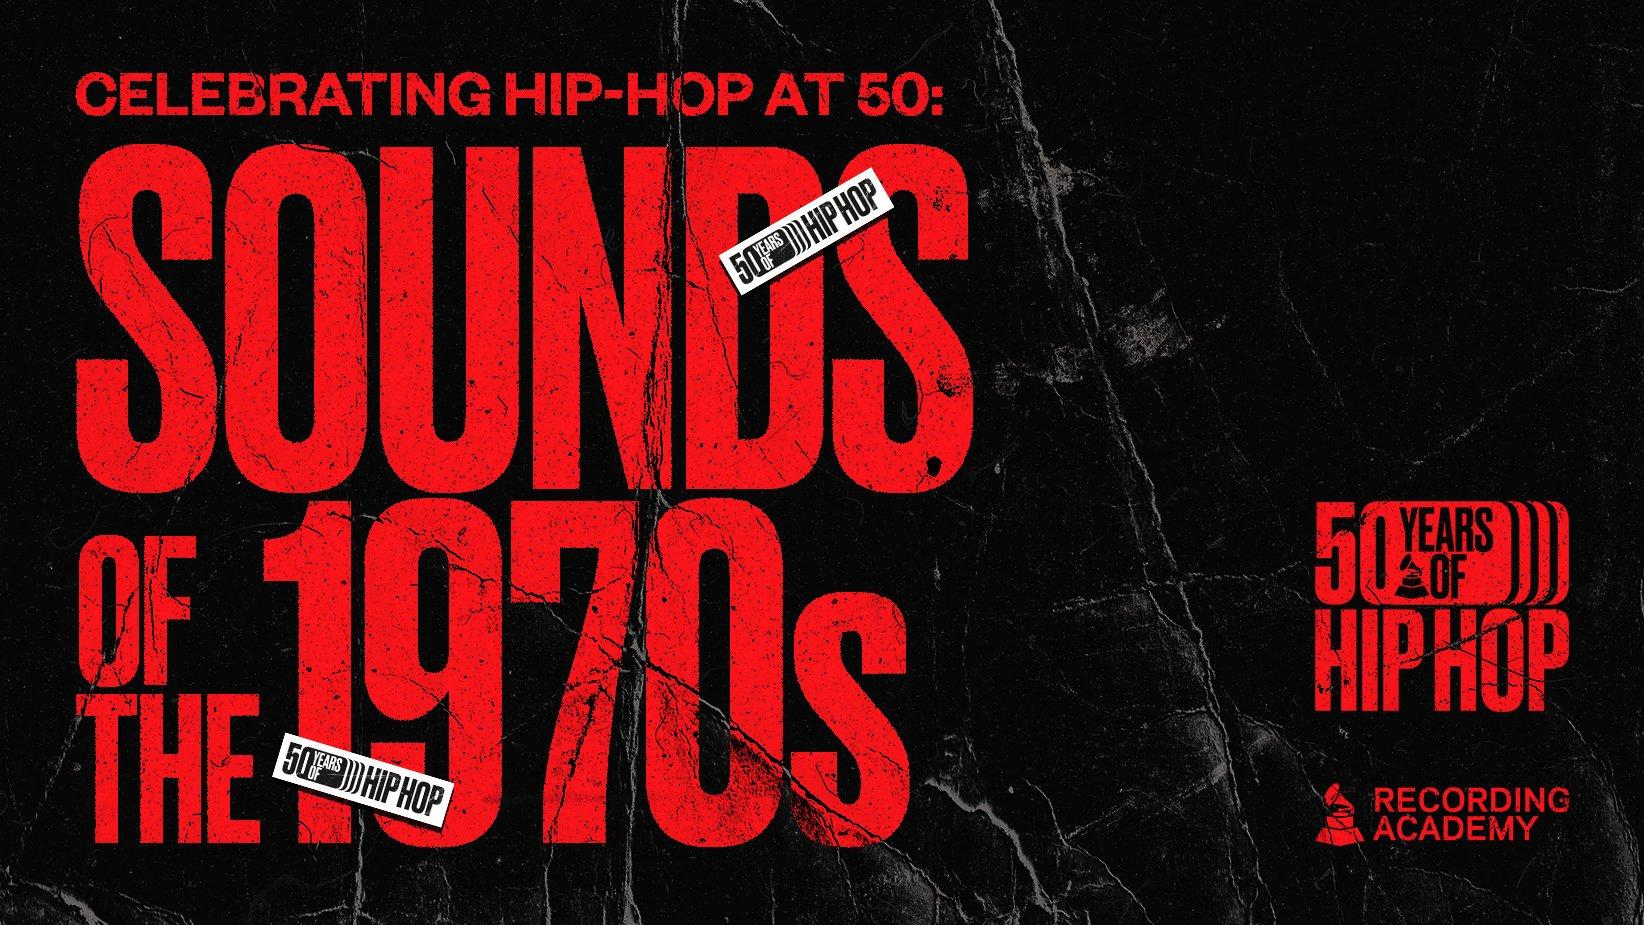 Essential Hip-Hop Releases From The 1970s: Kurtis Blow, Grandmaster Flash,  Sugarhill Gang & More